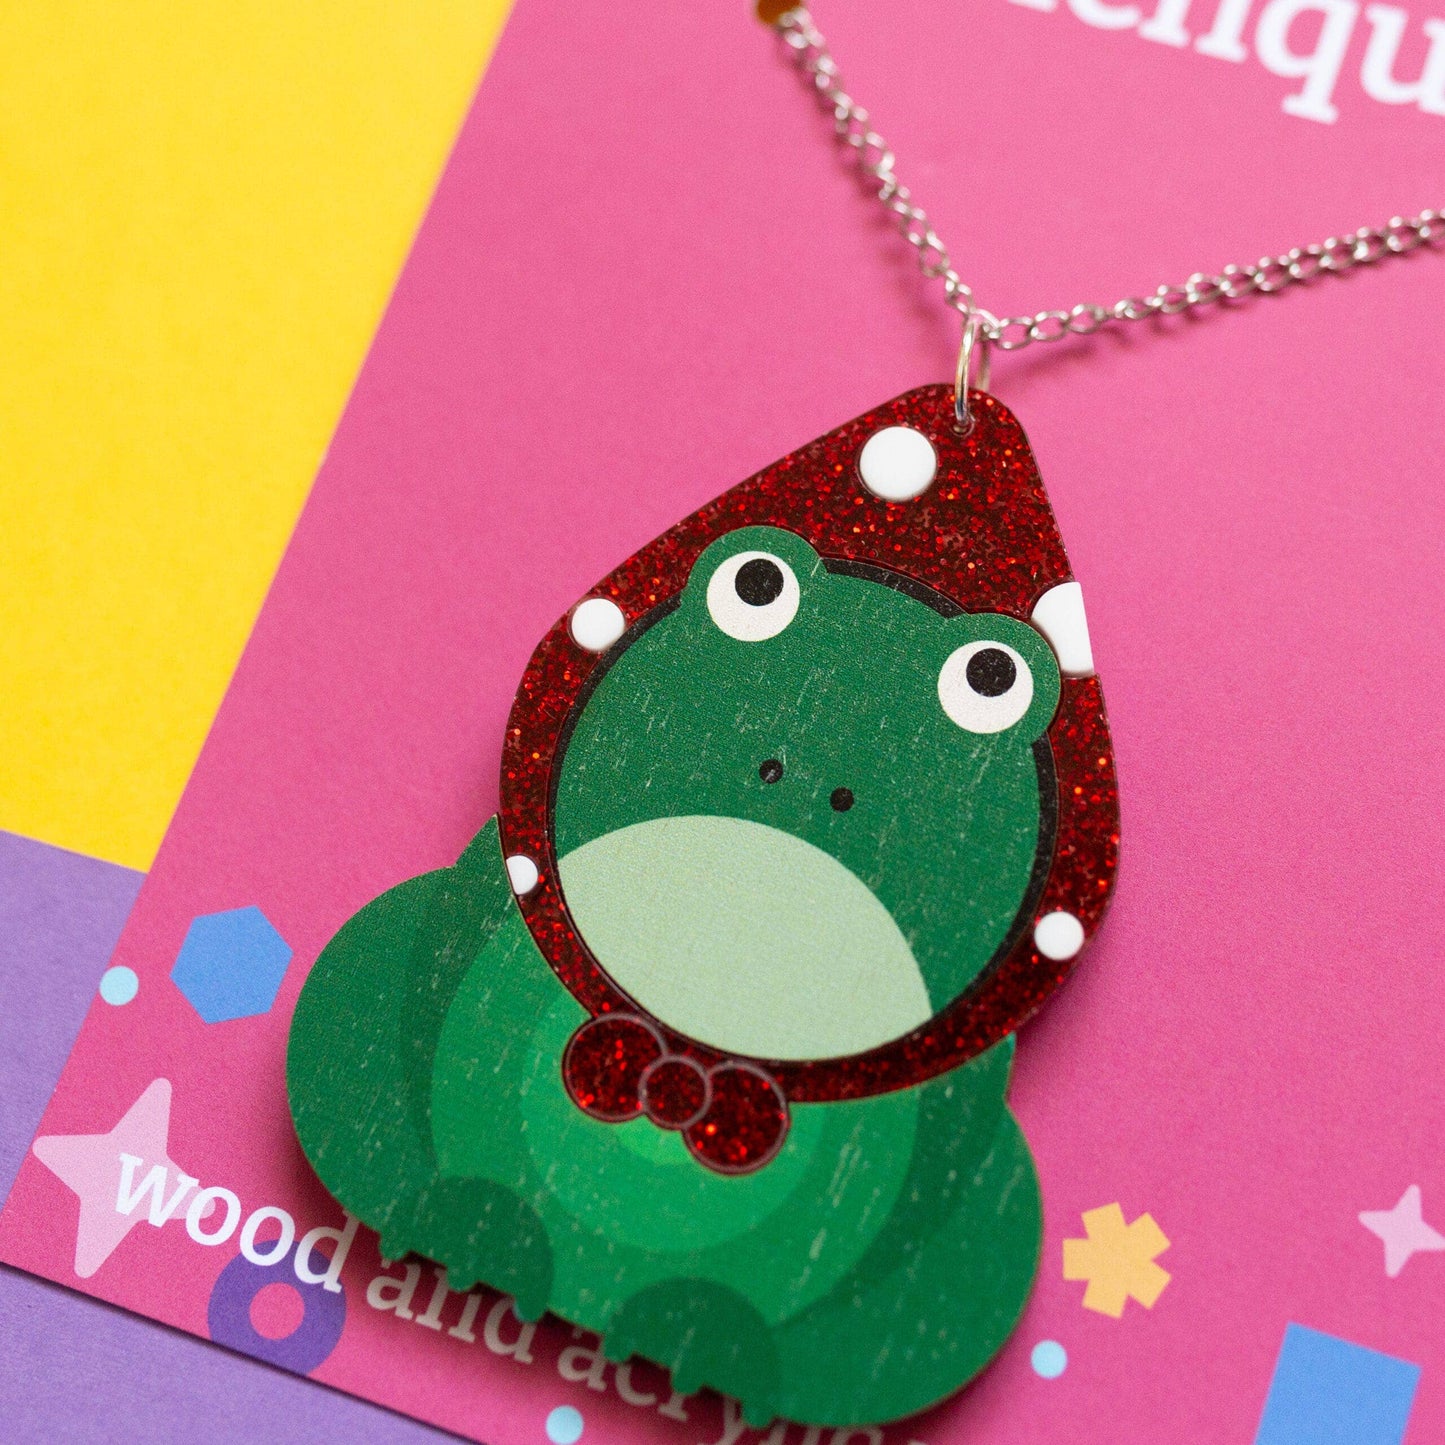 Grumpy Frog acrylic and wood statement necklace